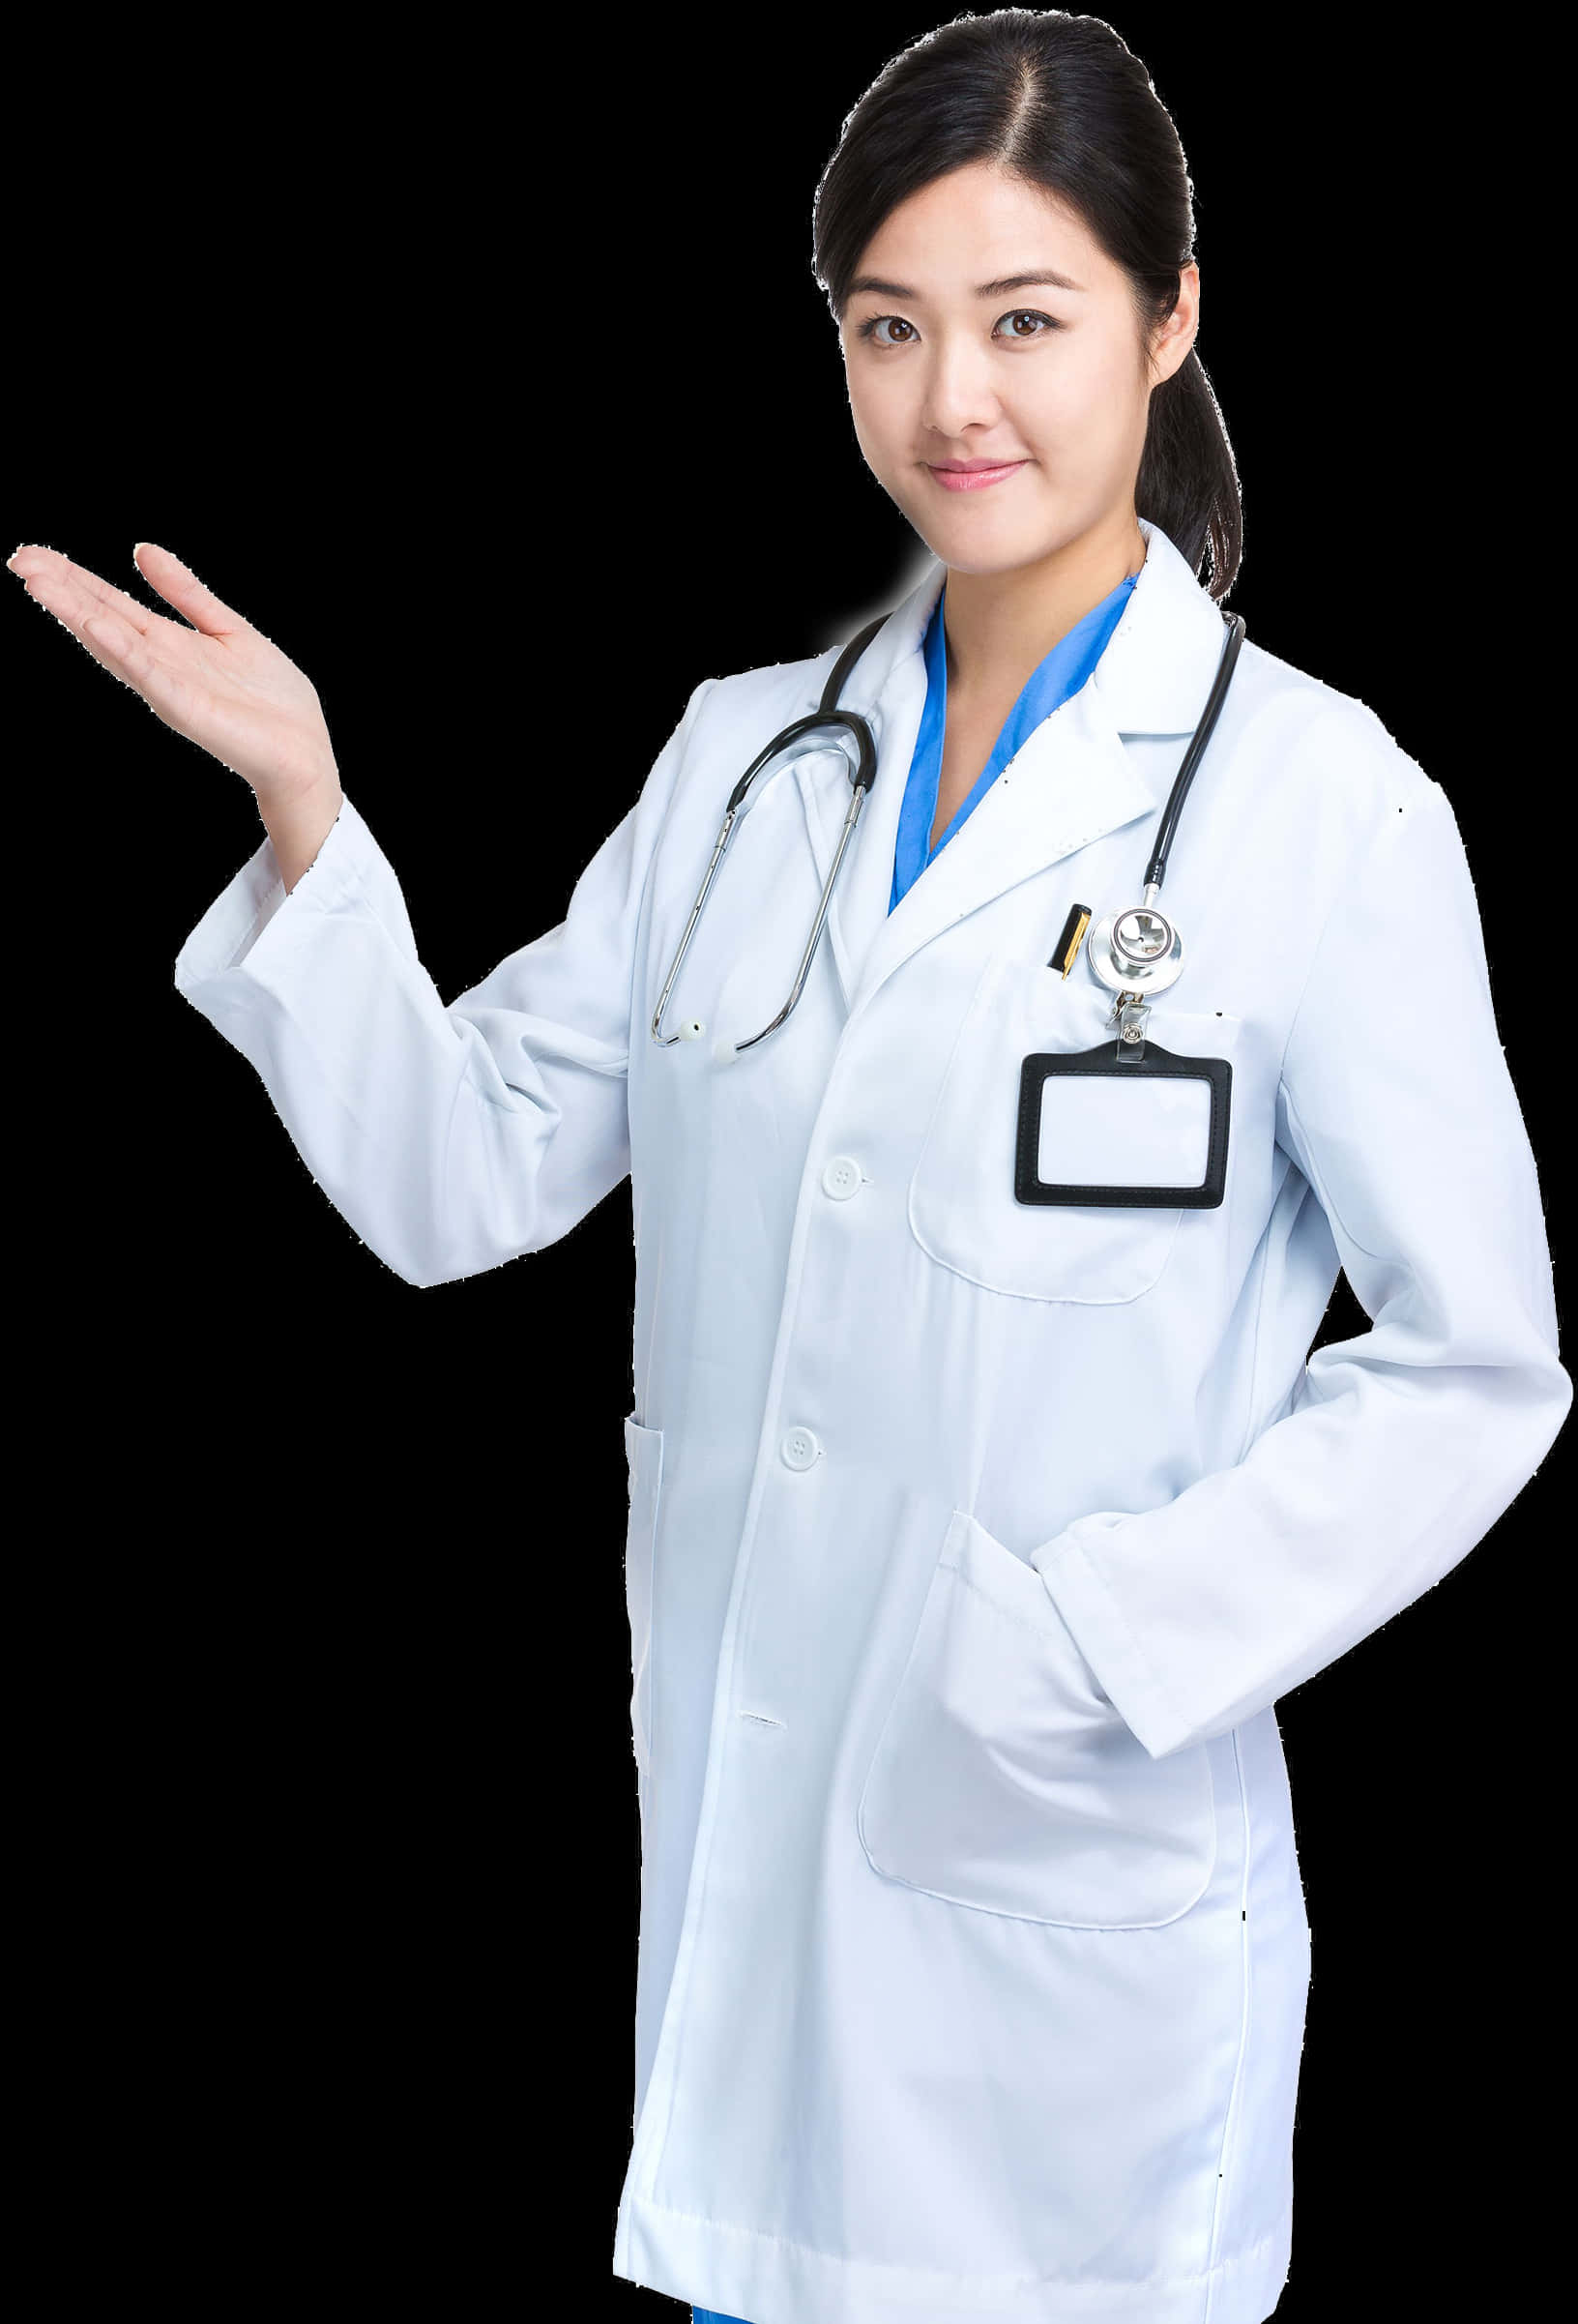 Professional Female Doctor Presenting PNG image